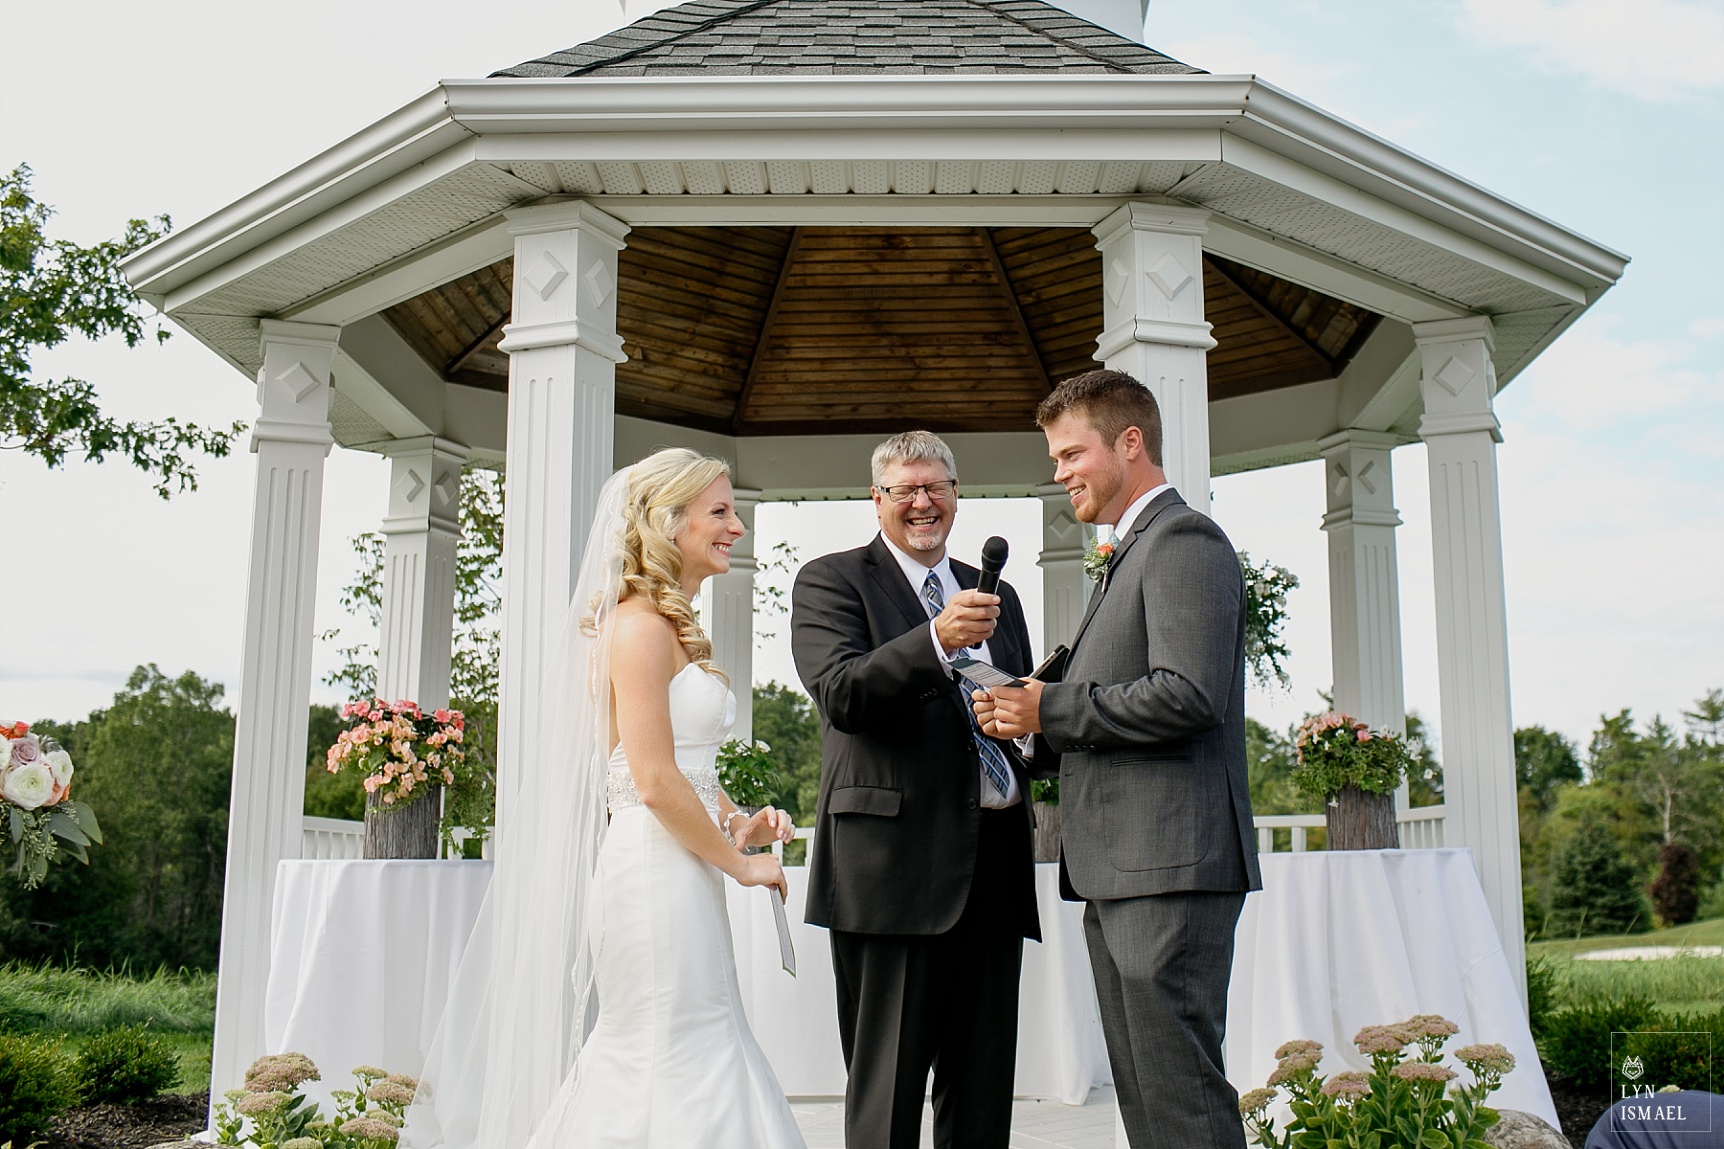 Bride and groom exchanges vows